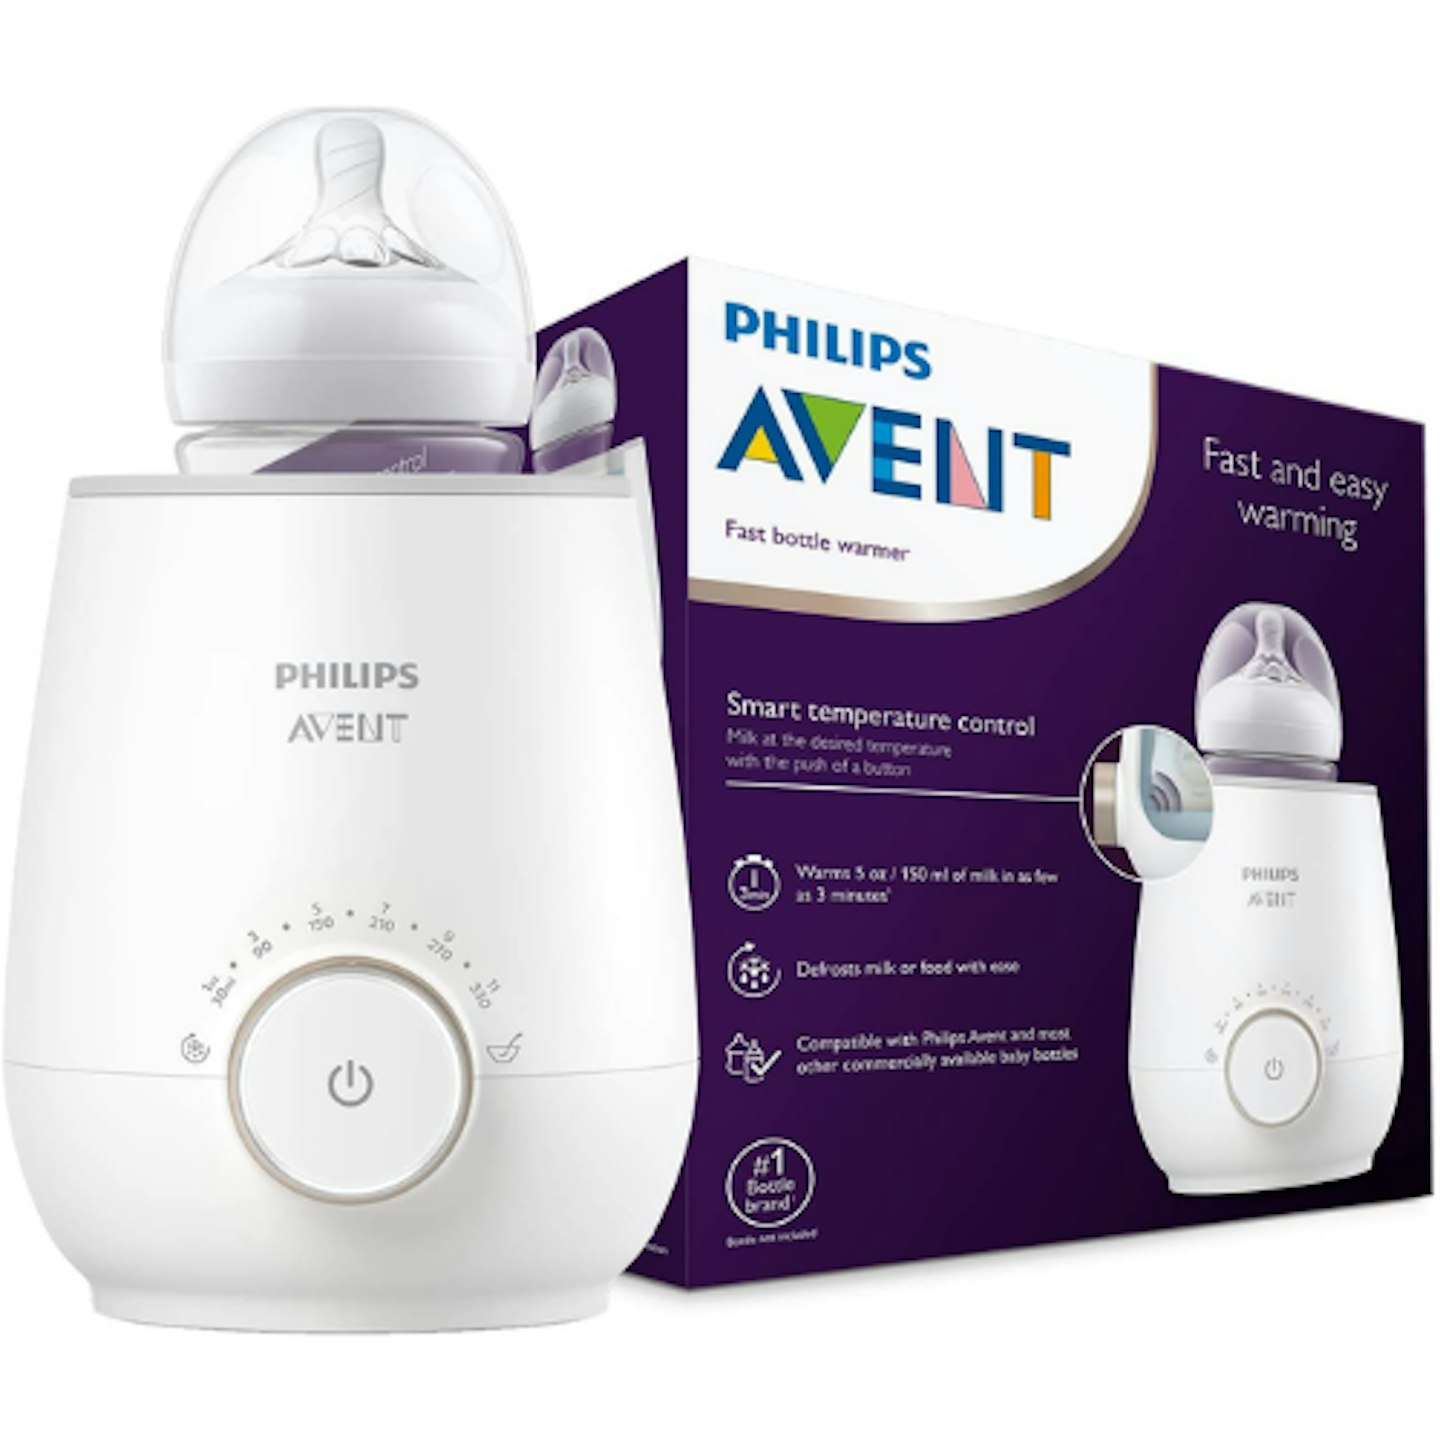 https://images.bauerhosting.com/affiliates/sites/12/motherandbaby/2022/04/Philips-Avent-Fast-Bottle-Warmer-with-Smart-Temperature-Control.png?auto=format&w=1440&q=80